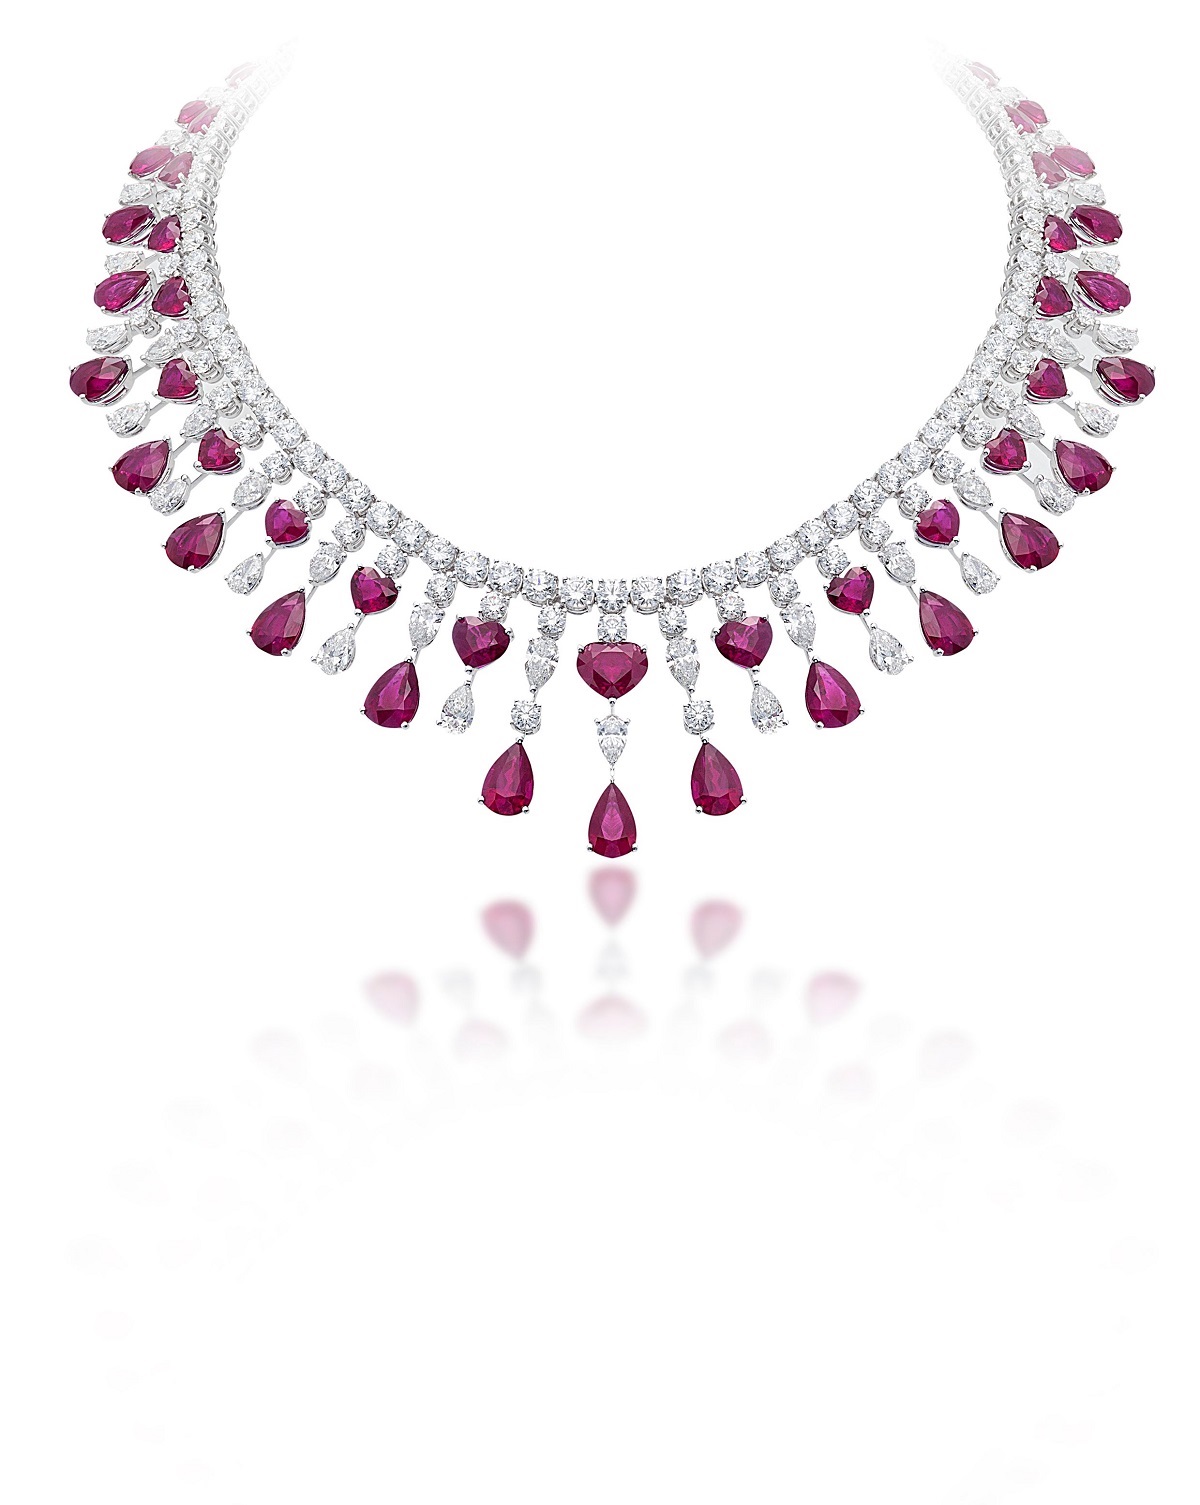 PICCHIOTTI “Masterpieces” Platinum necklace with Diamonds (32.78 cts.) and Pigeon’s Blood Rubies (108.21 cts.). 